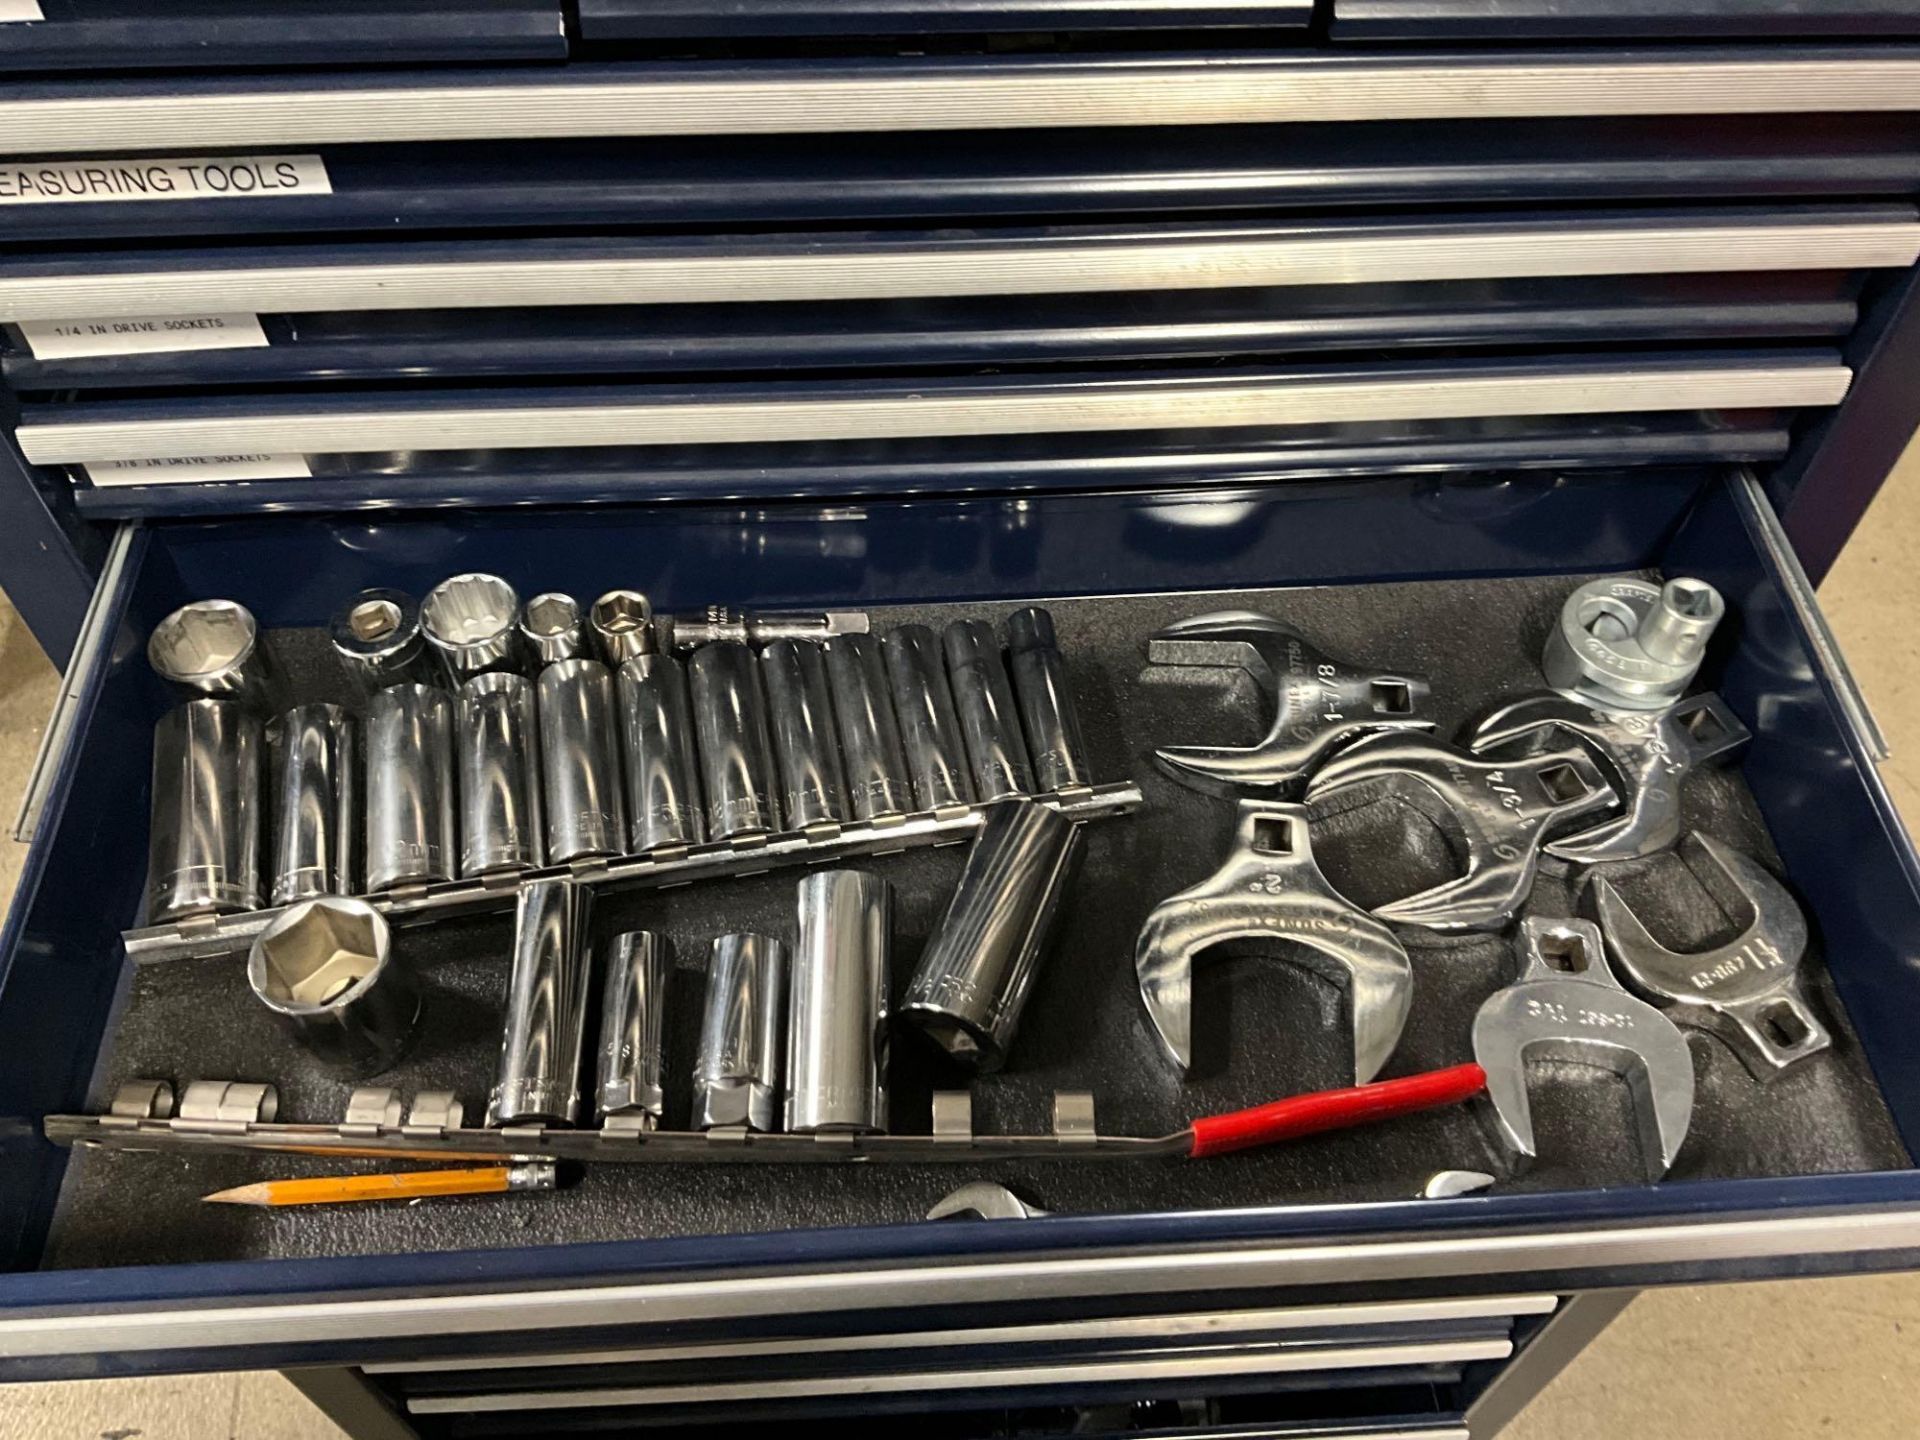 CRAFTSMAN TOOLBOX LOADED WITH TOOLS - Image 10 of 21